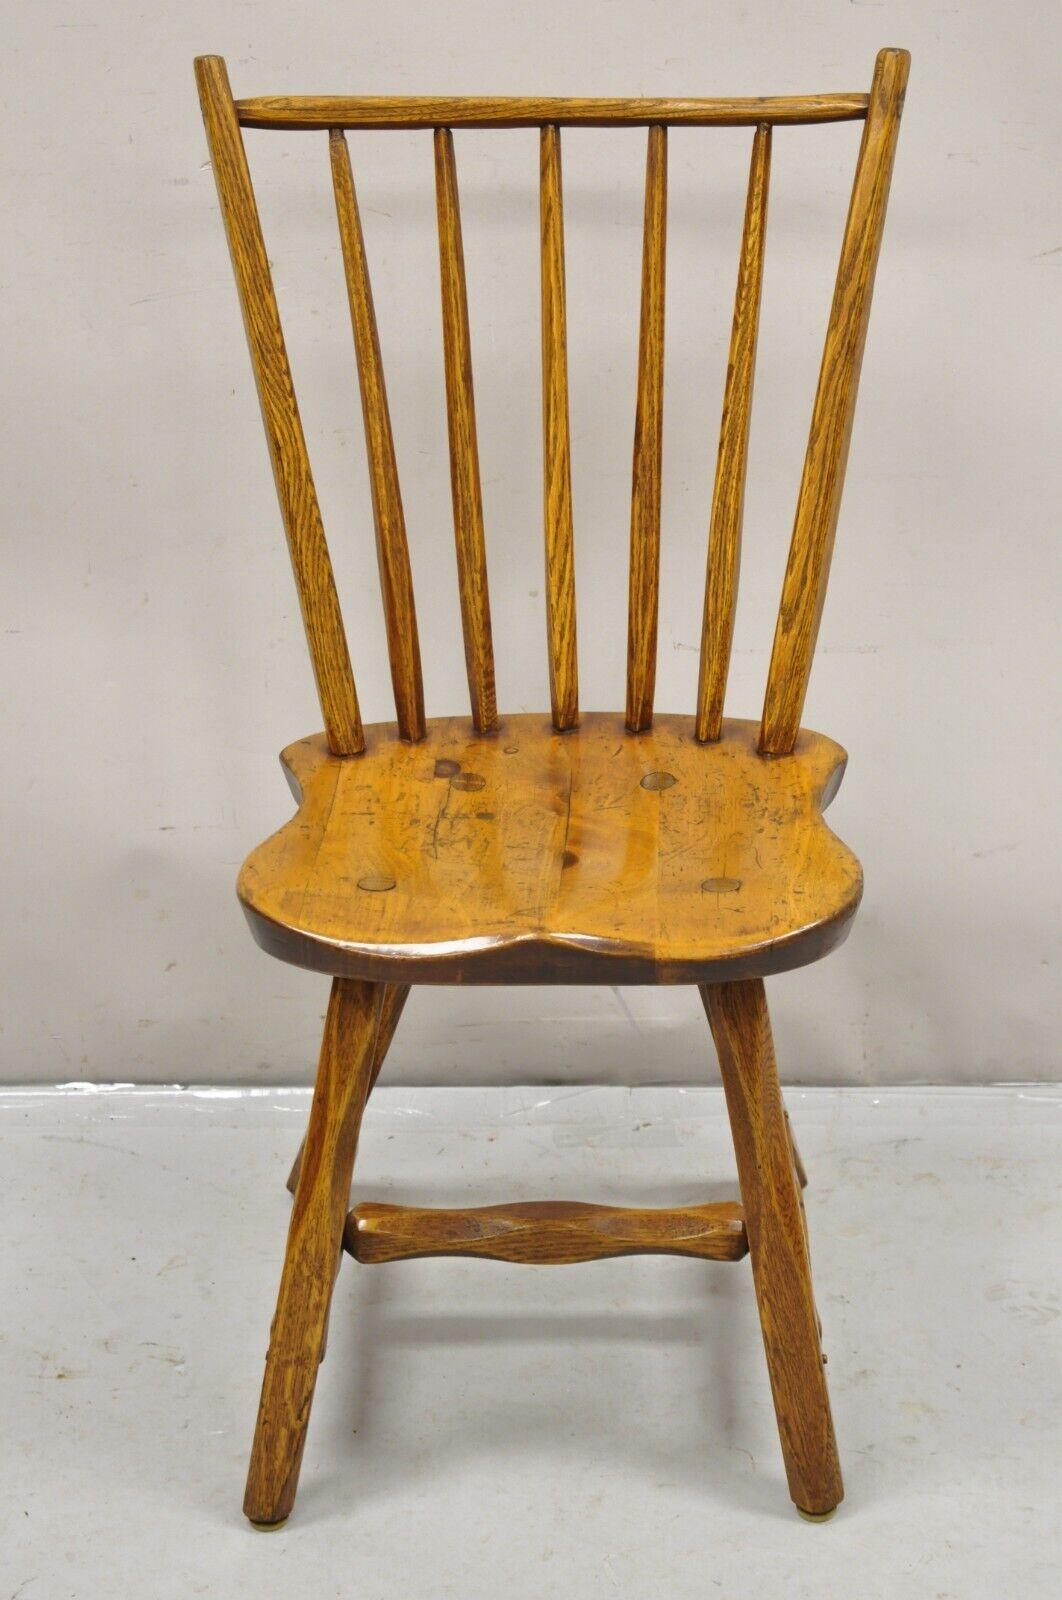 Antique Hunt Country Furniture Colonial Pine Wood Hickory Style Side Chairs - a Pair. Circa Early to Mid 20th Century. Measurements: 36